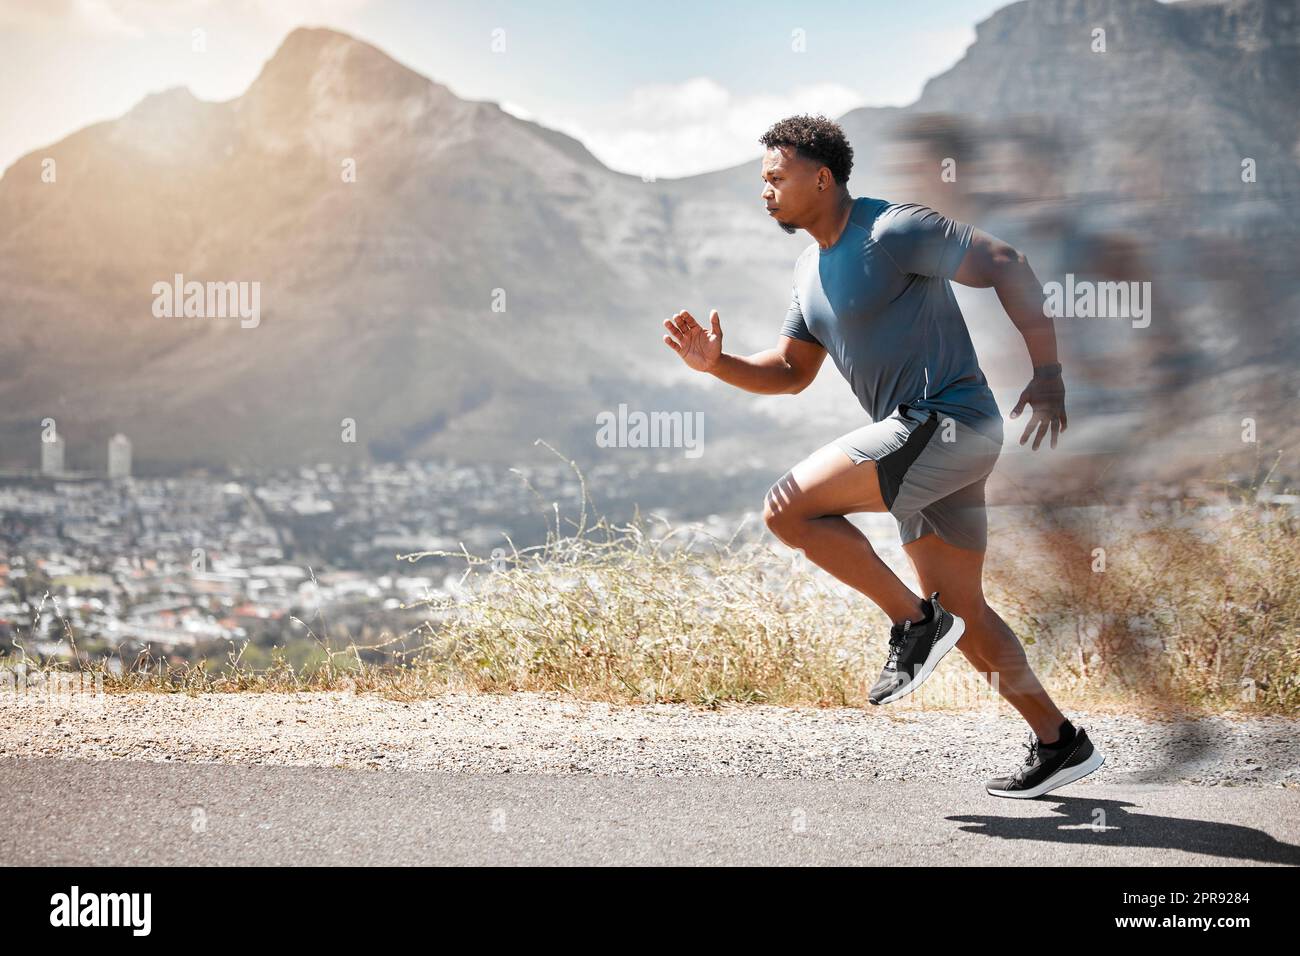 Set goalposts while you run. a handsome young man running alone outdoors. Stock Photo